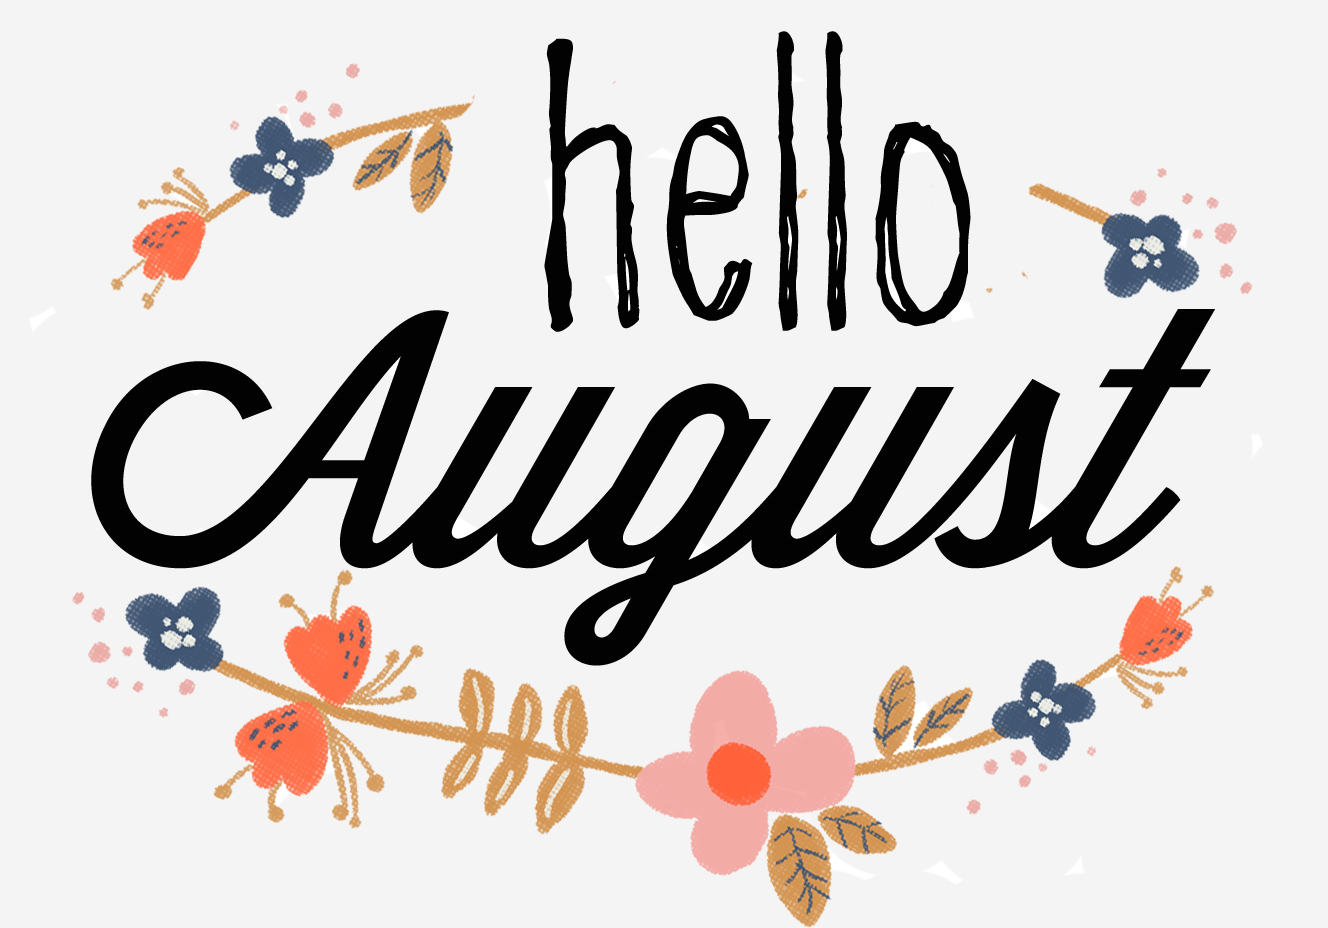 Pin hello august.